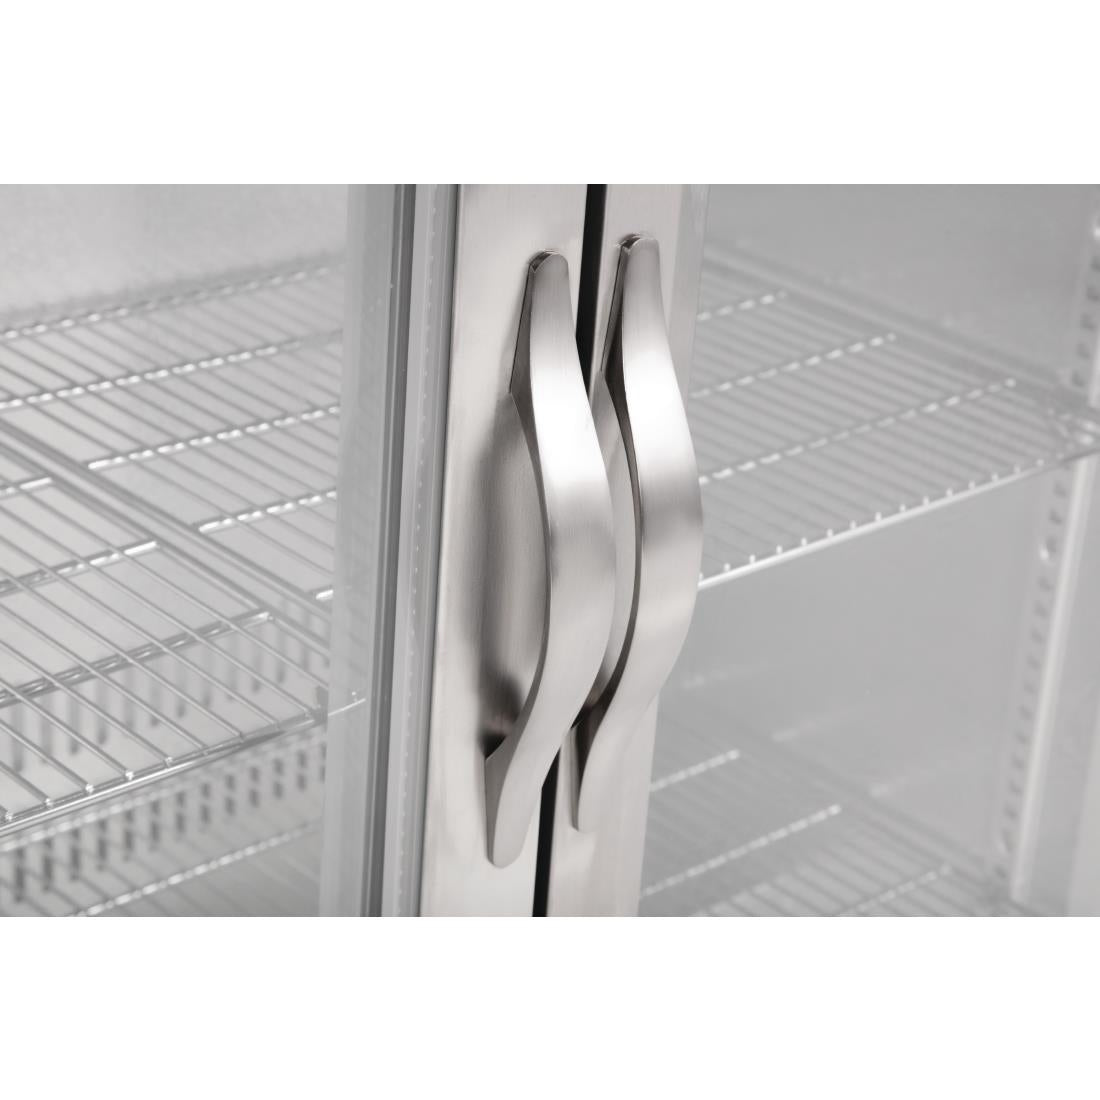 GL009 Polar G-Series Back Bar Cooler with Hinged Doors Stainless Steel 330Ltr GL009